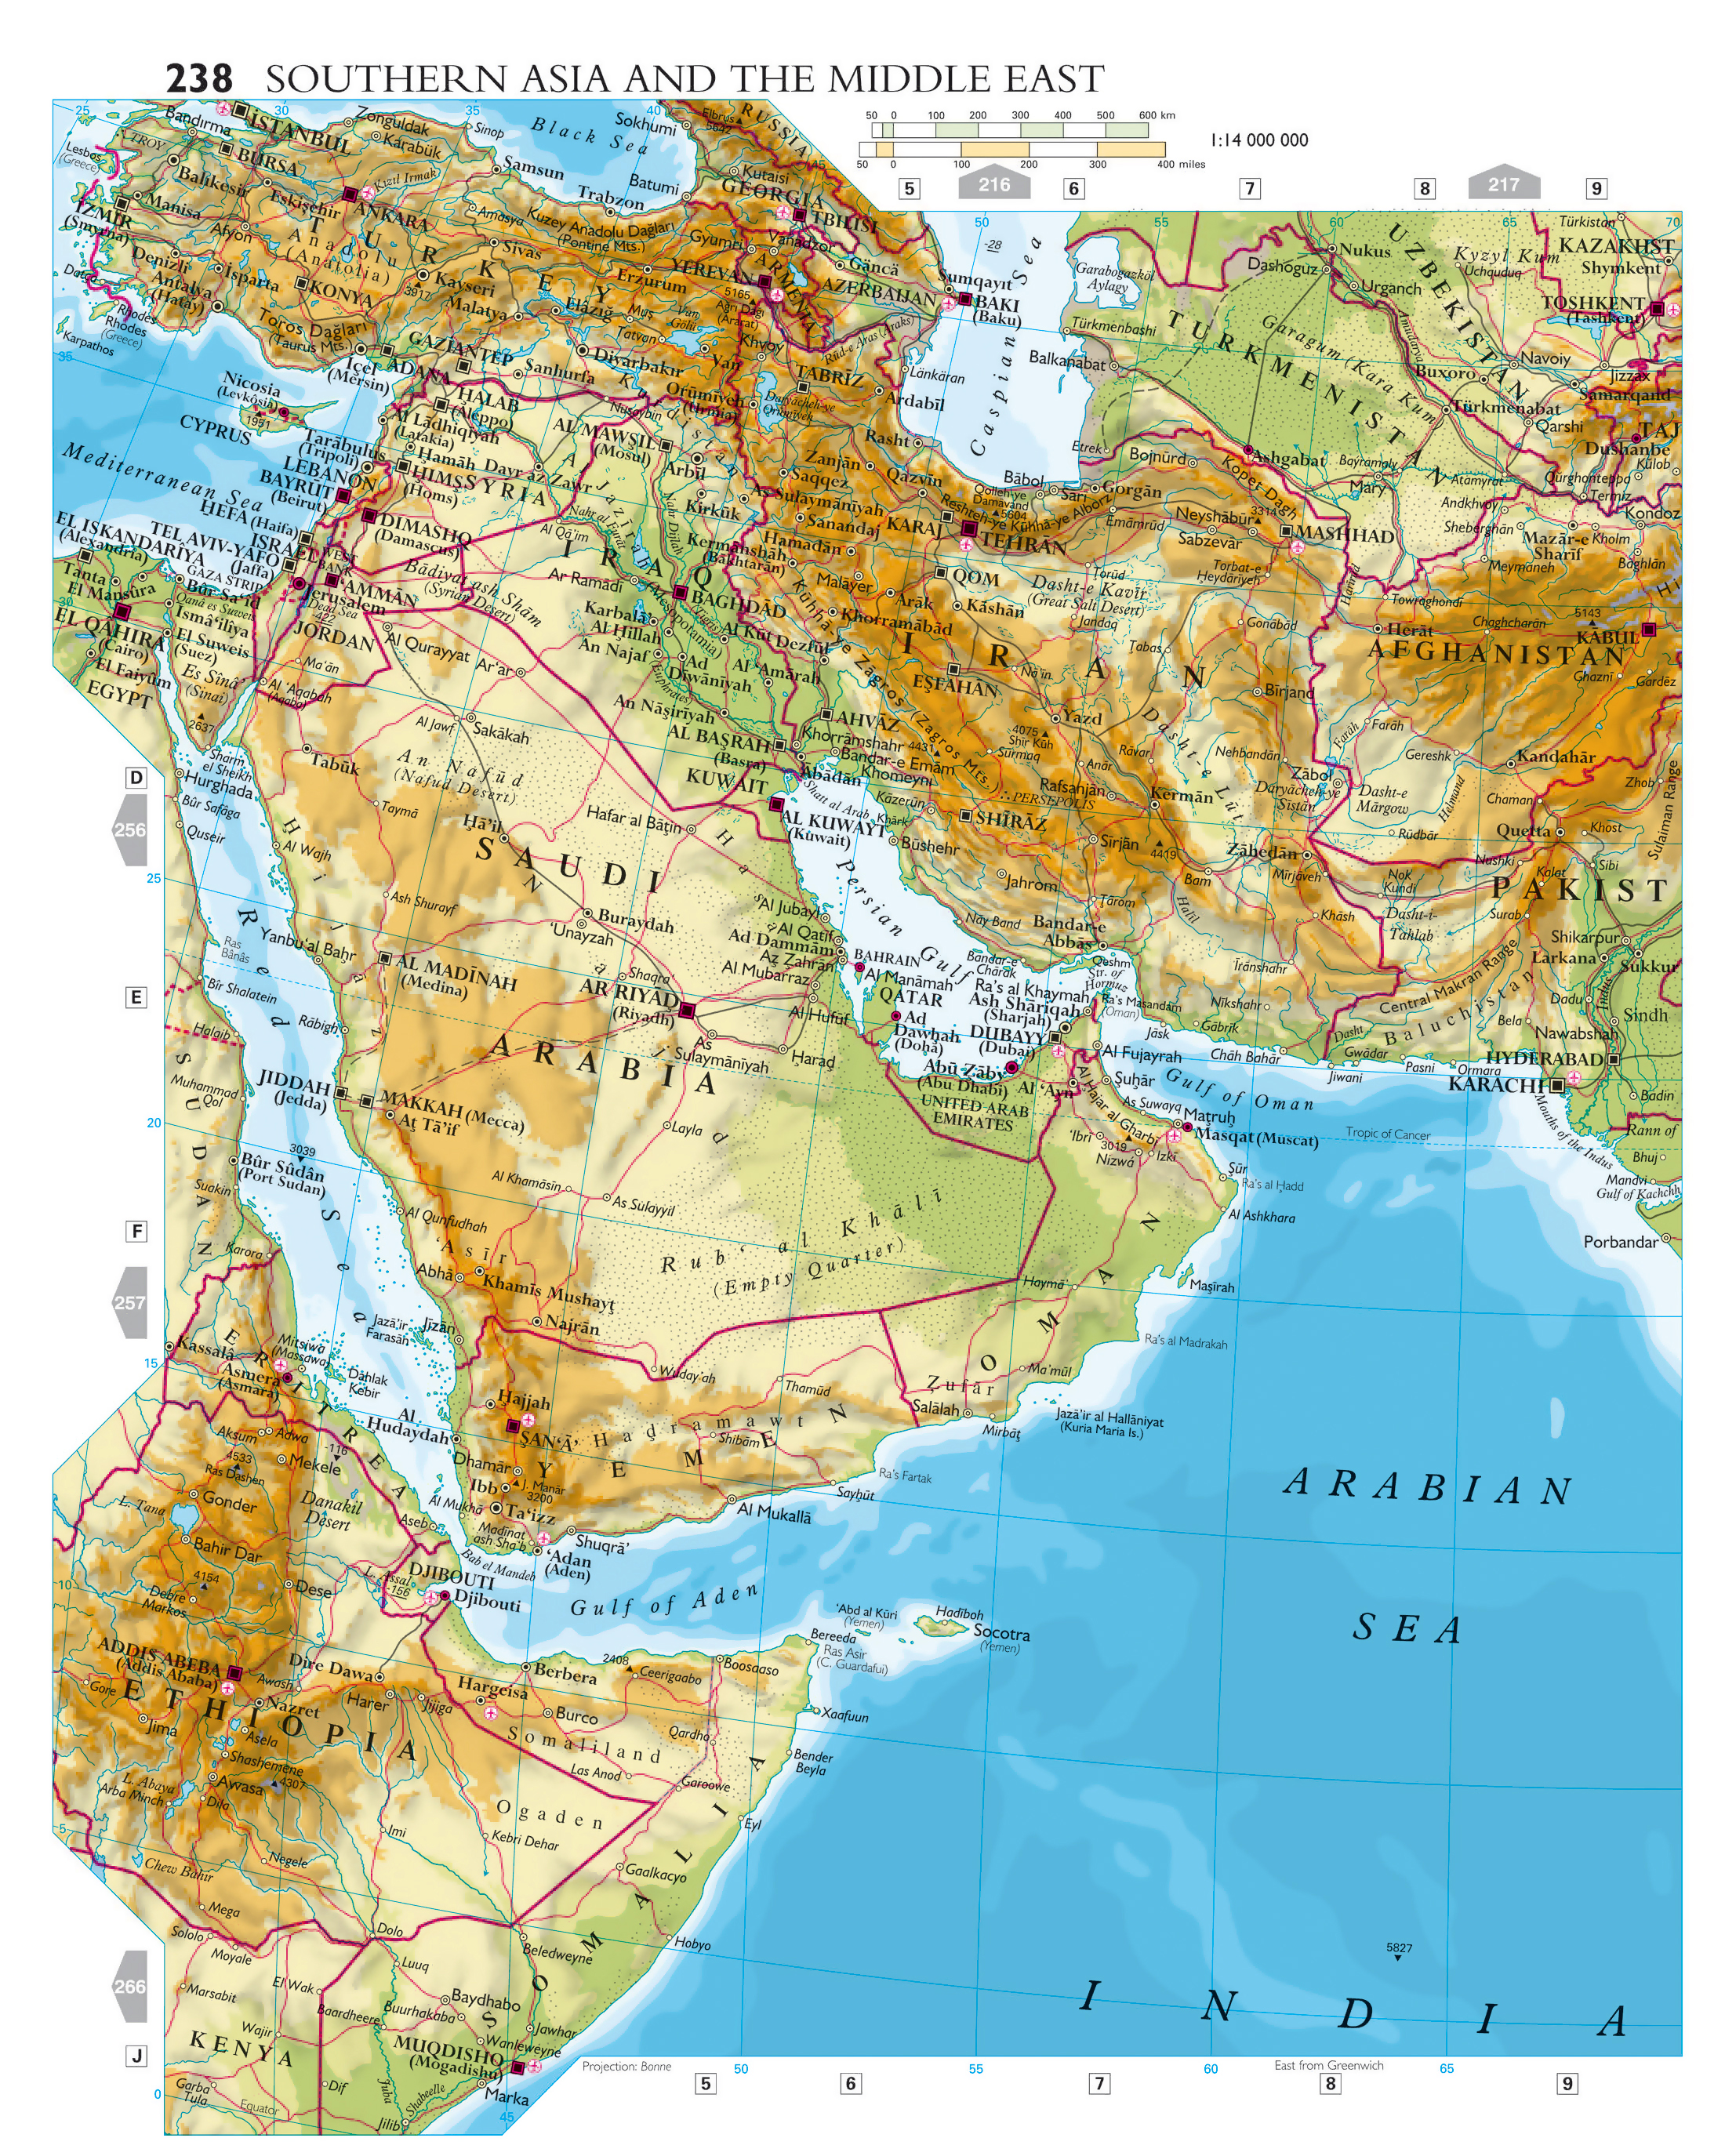 Large Detailed Elevation Map Of Southern Asia And The Middle East